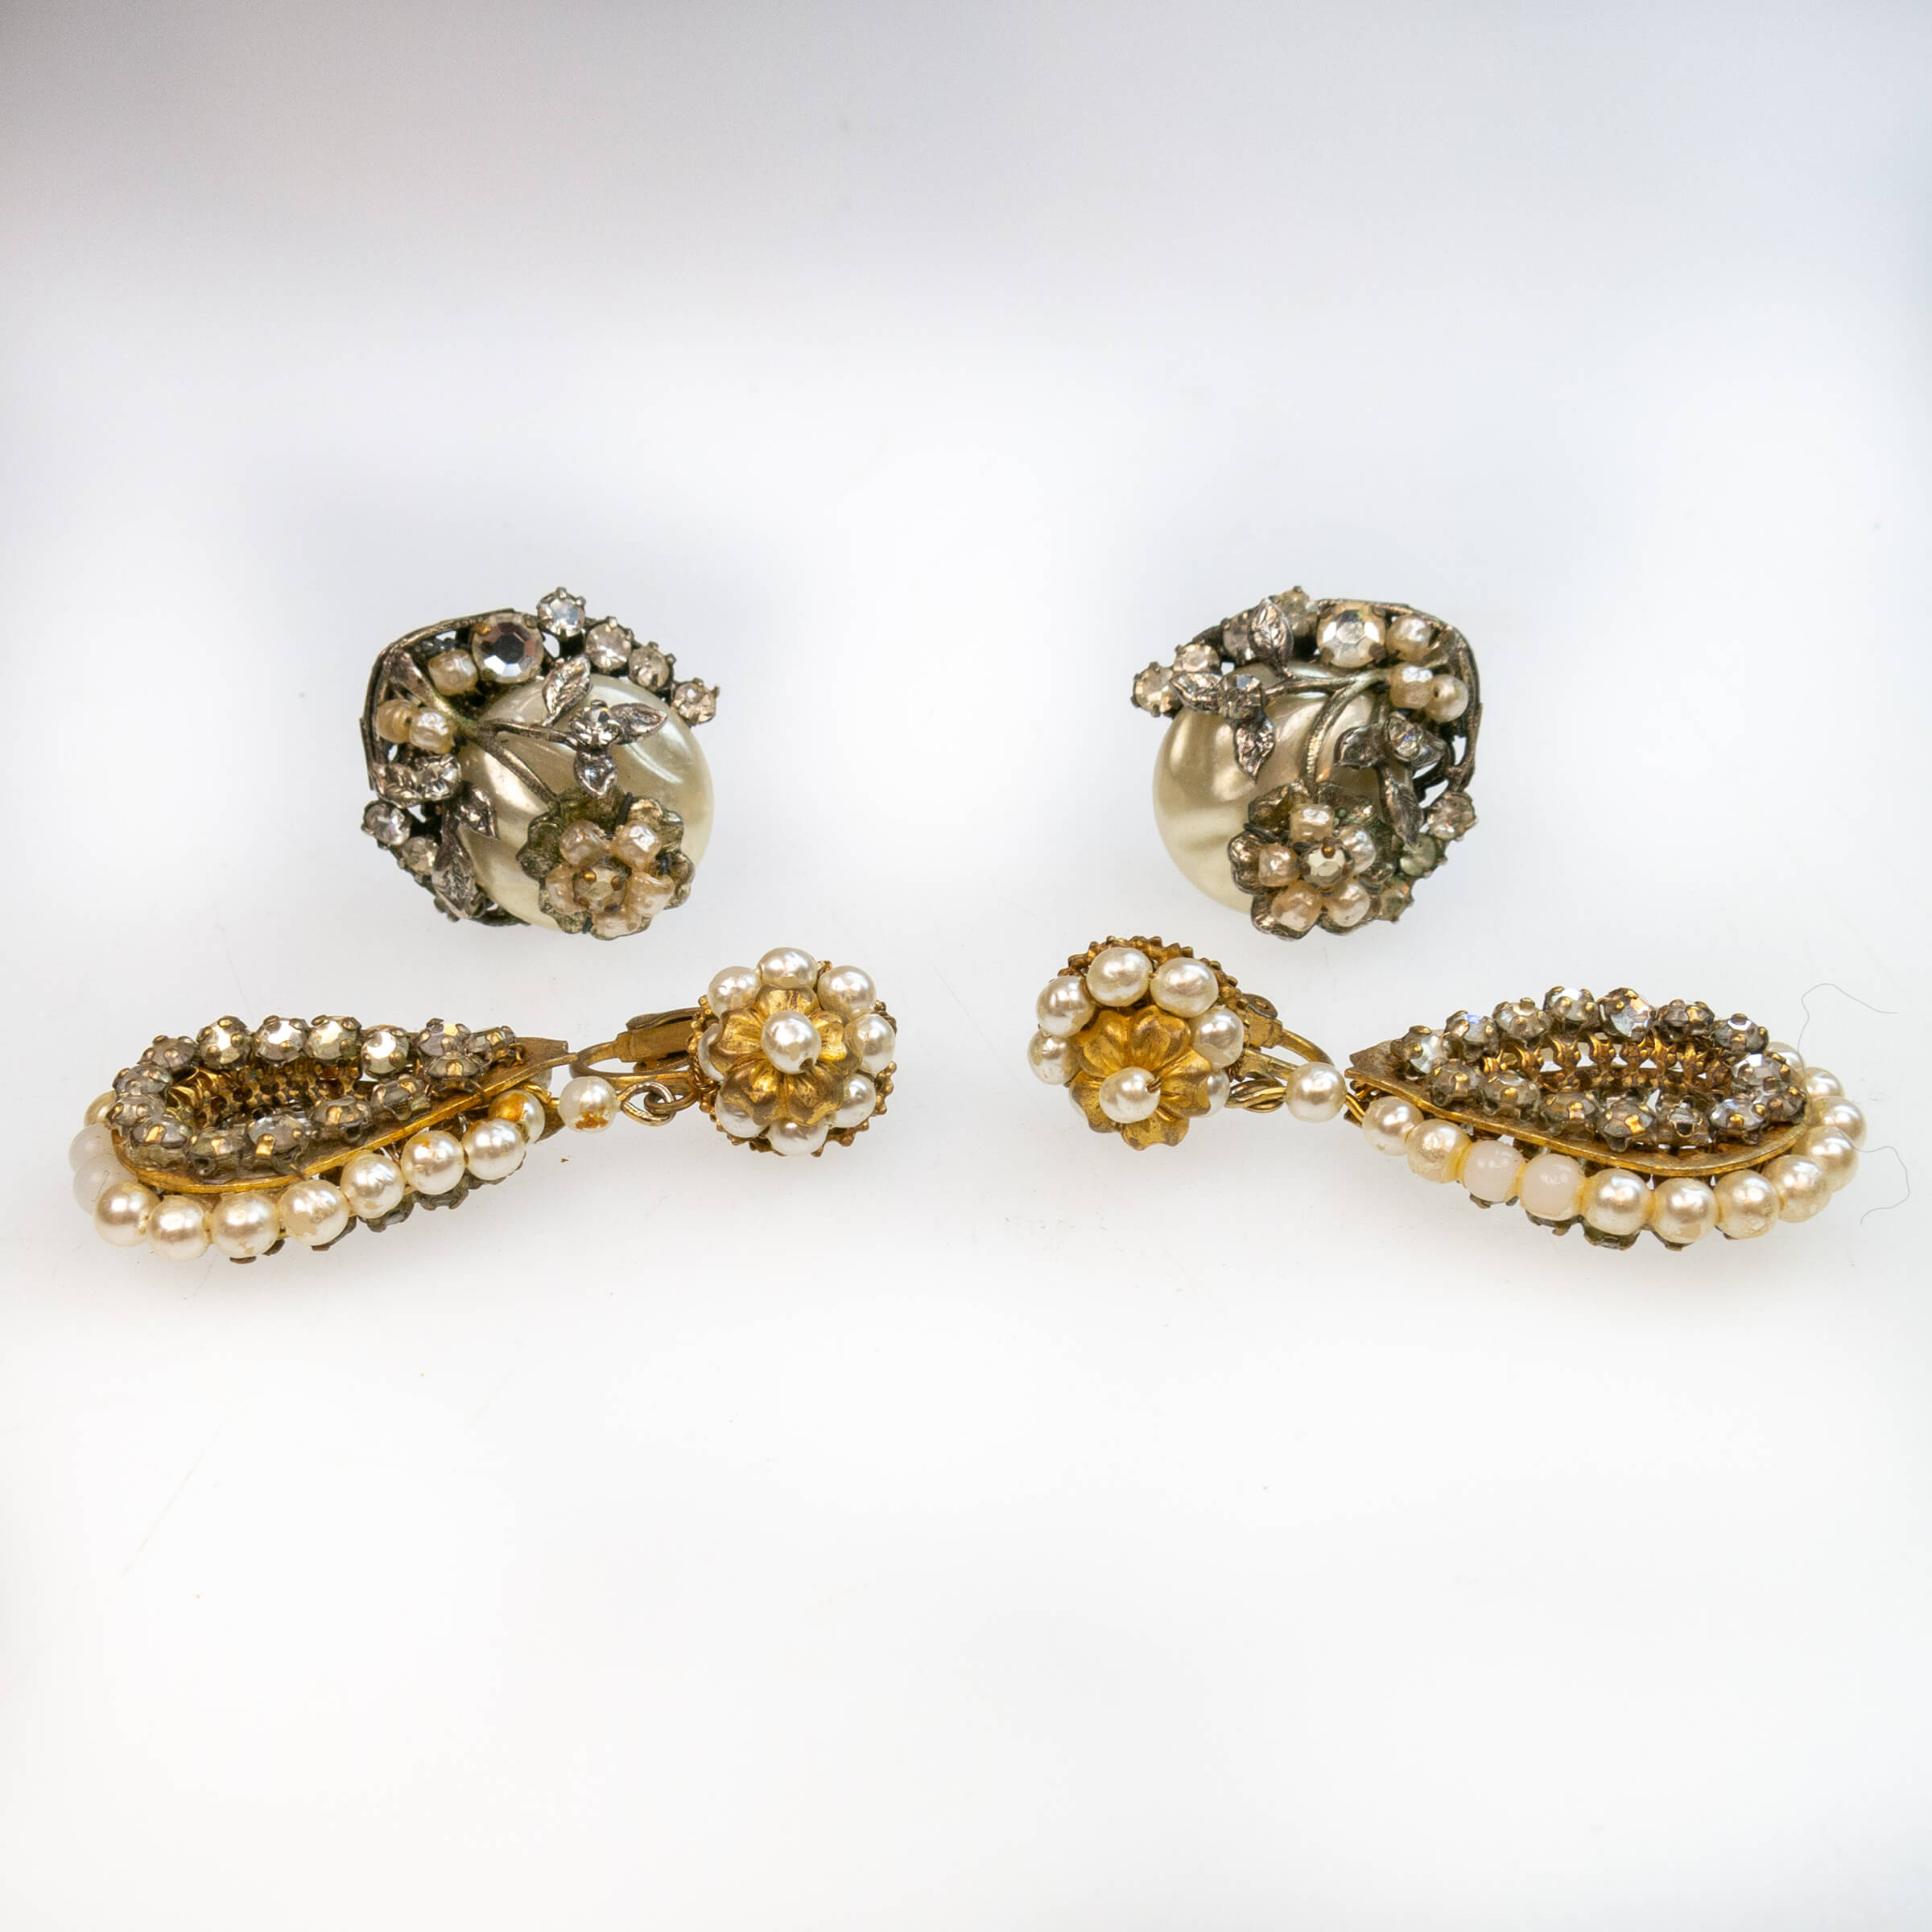 Pair Of Robert And A Pair Of Miriam Haskell Gold-Tone Metal Clip-Back Earrings